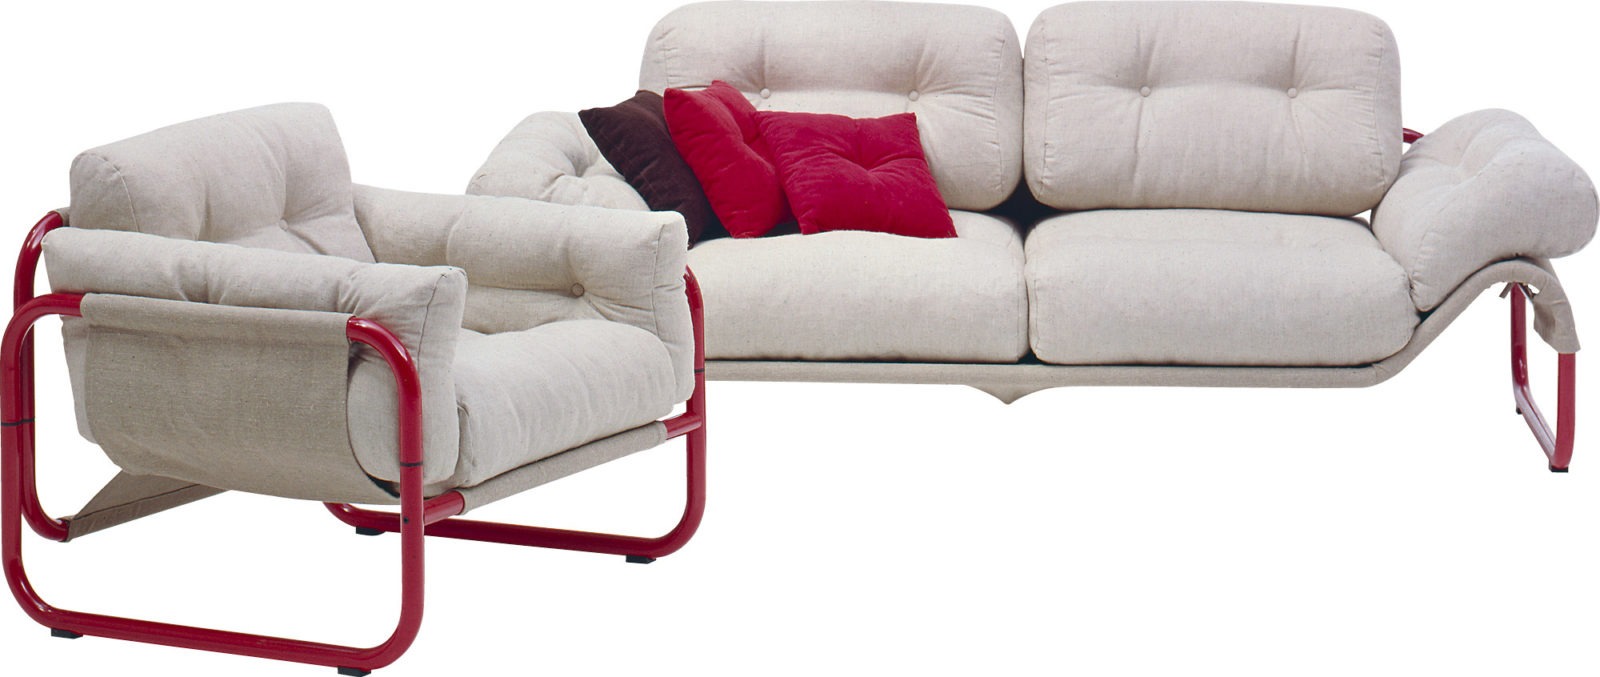 Sofa and armchair with red-lacquered tubing in soft shapes with sand-coloured cotton upholstery, KULING.